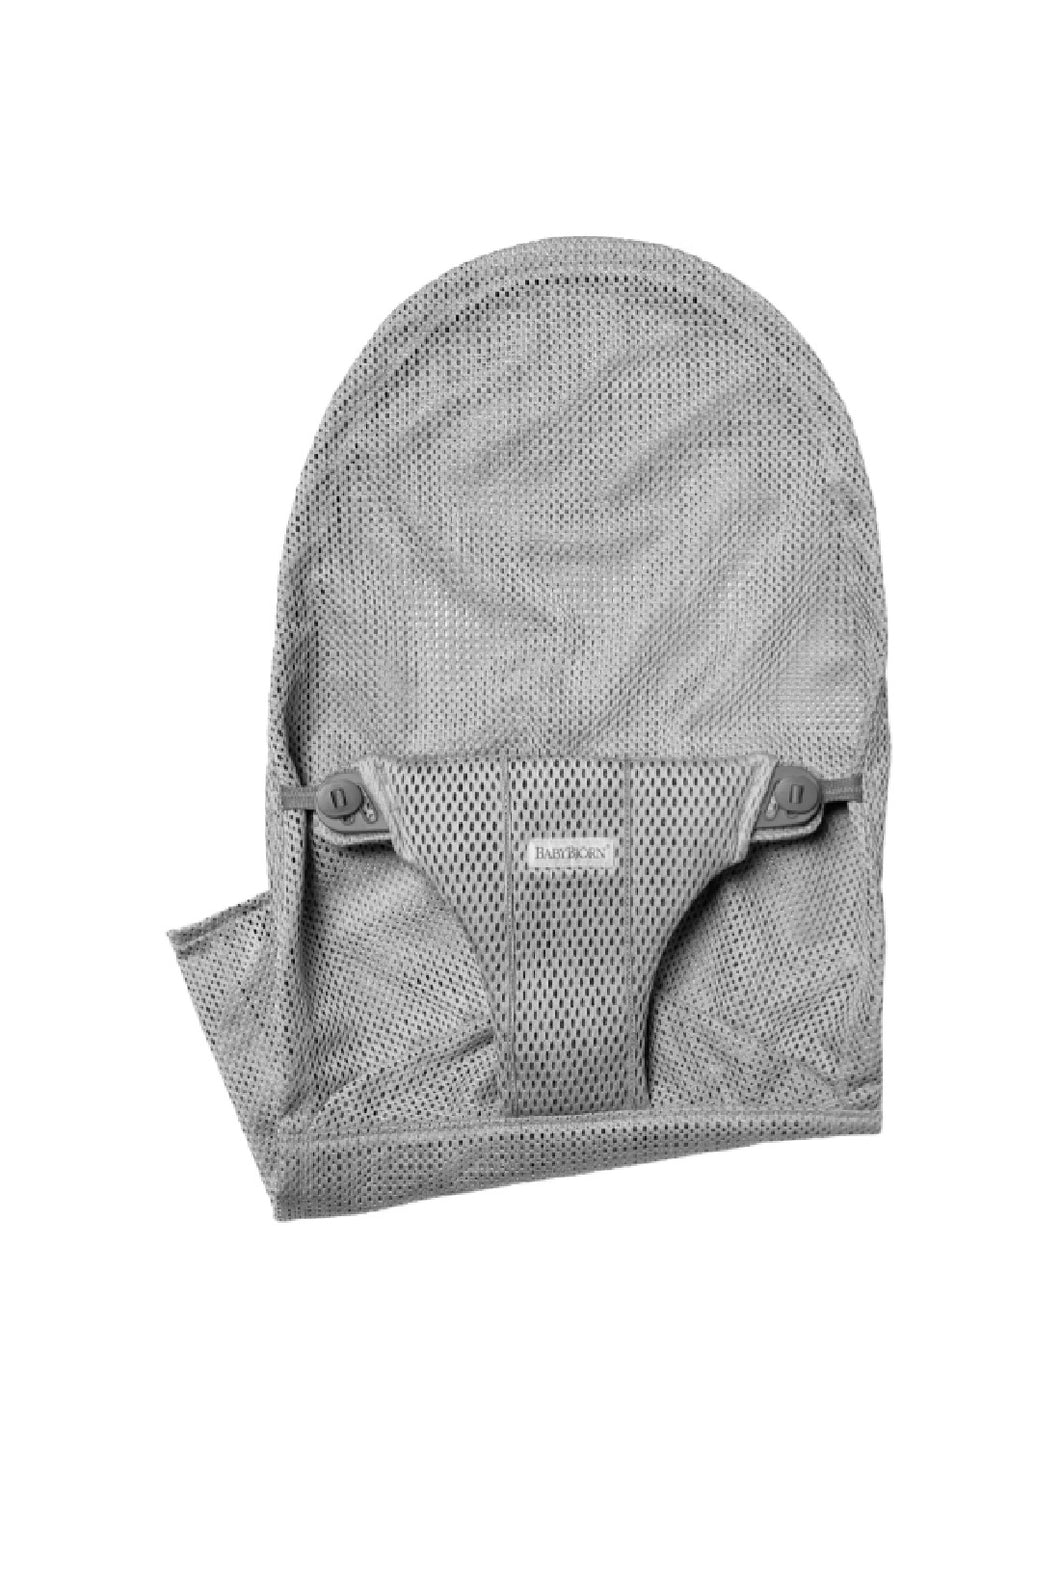 BabyBjorn Extra Fabric Seat For Bouncer Bliss Grey Mesh 1